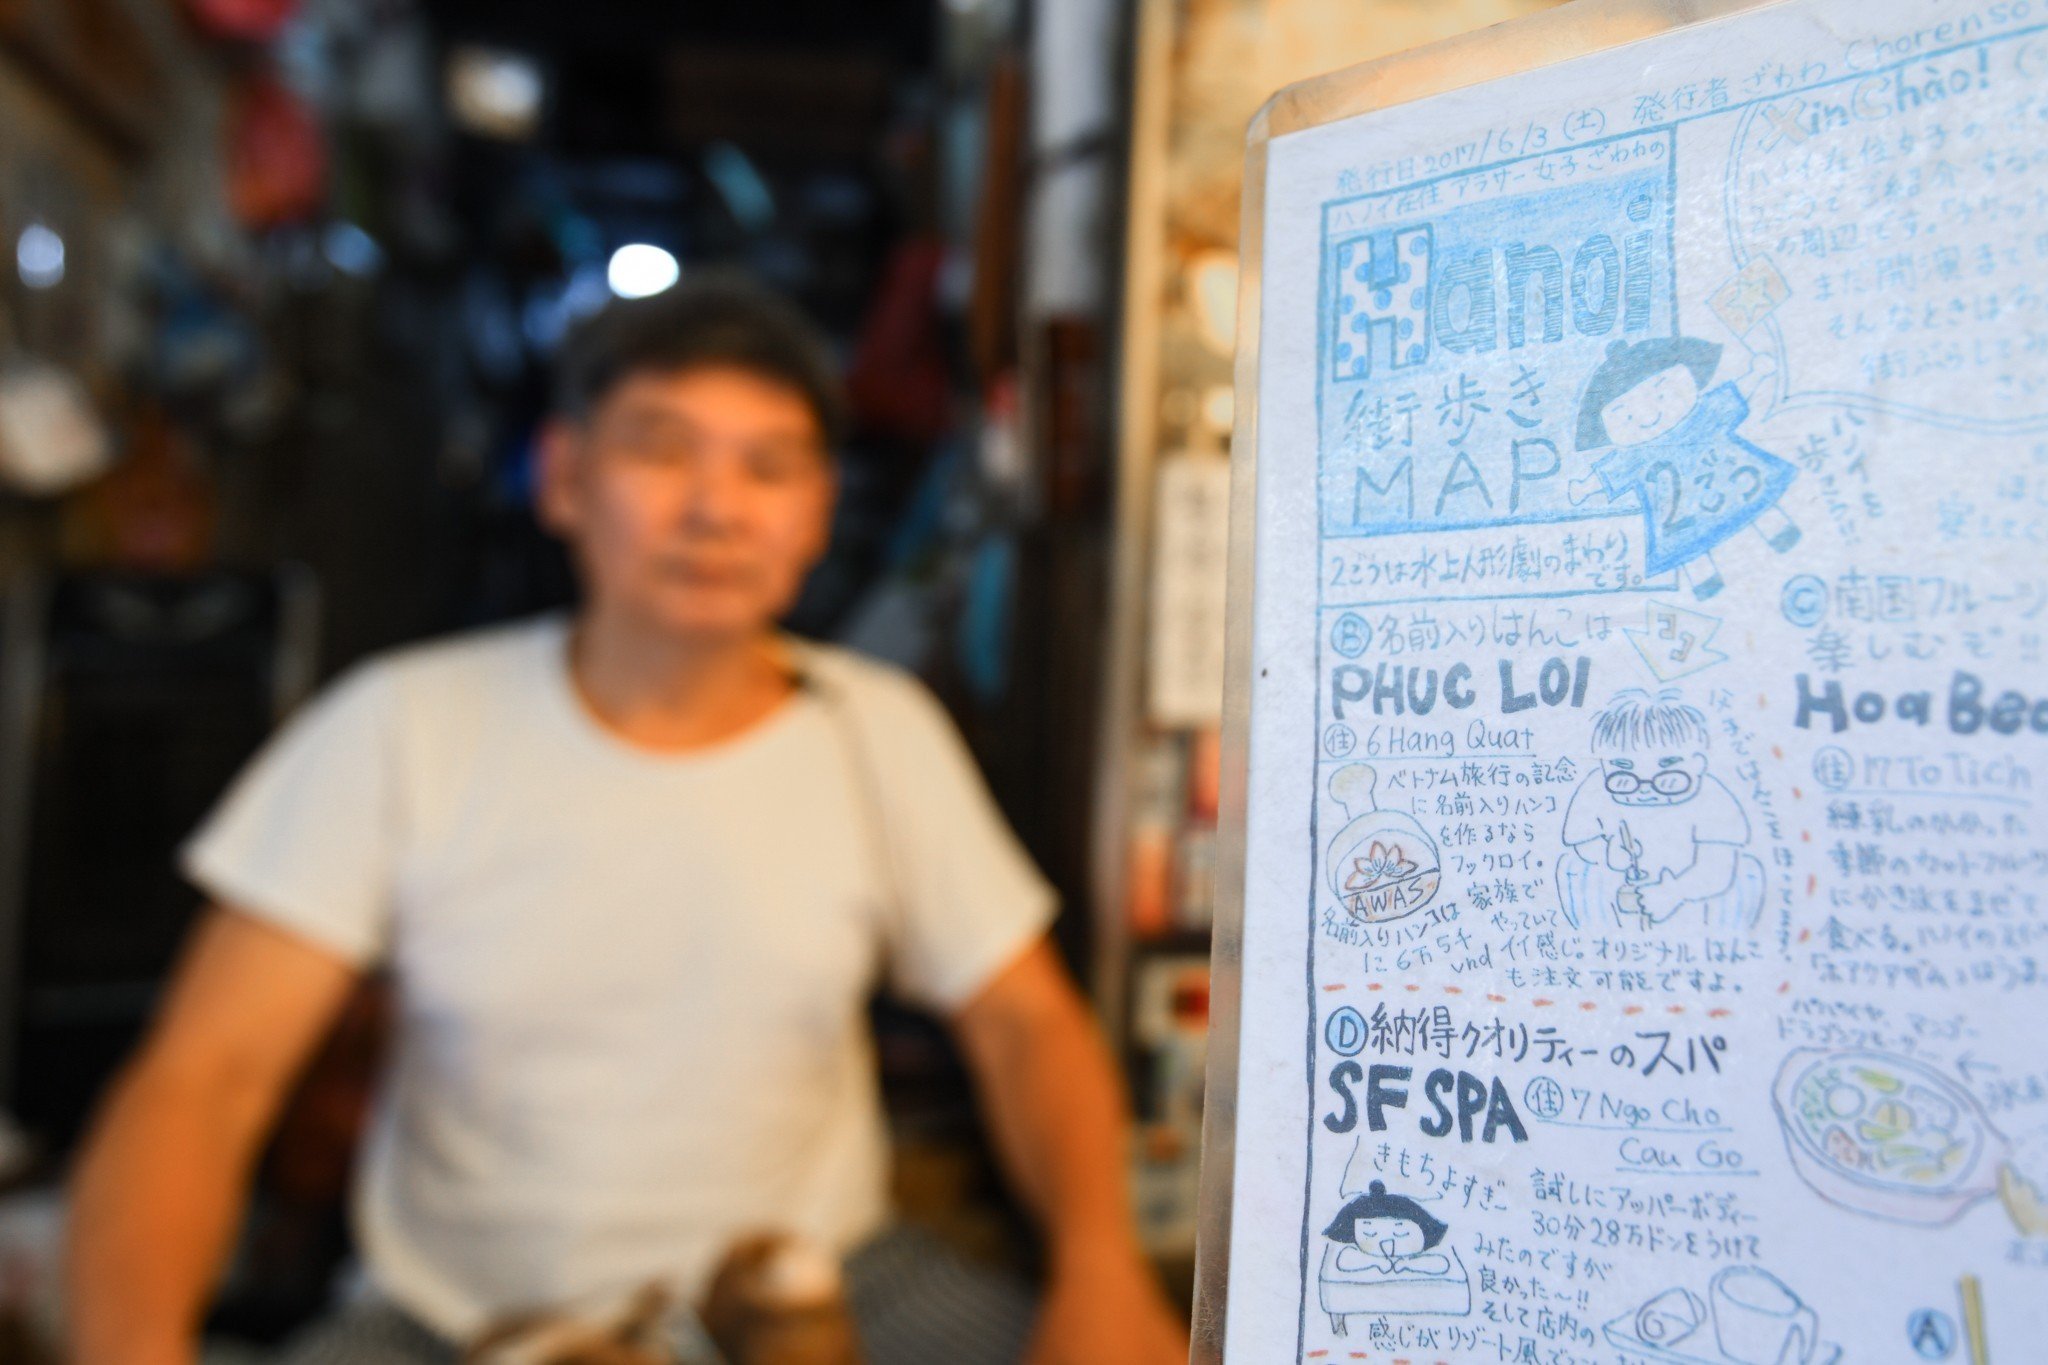 Toan’s shop is featured in a guide for Japanese tourists to Vietnam. Photo: Nam Tran / Tuoi Tre News